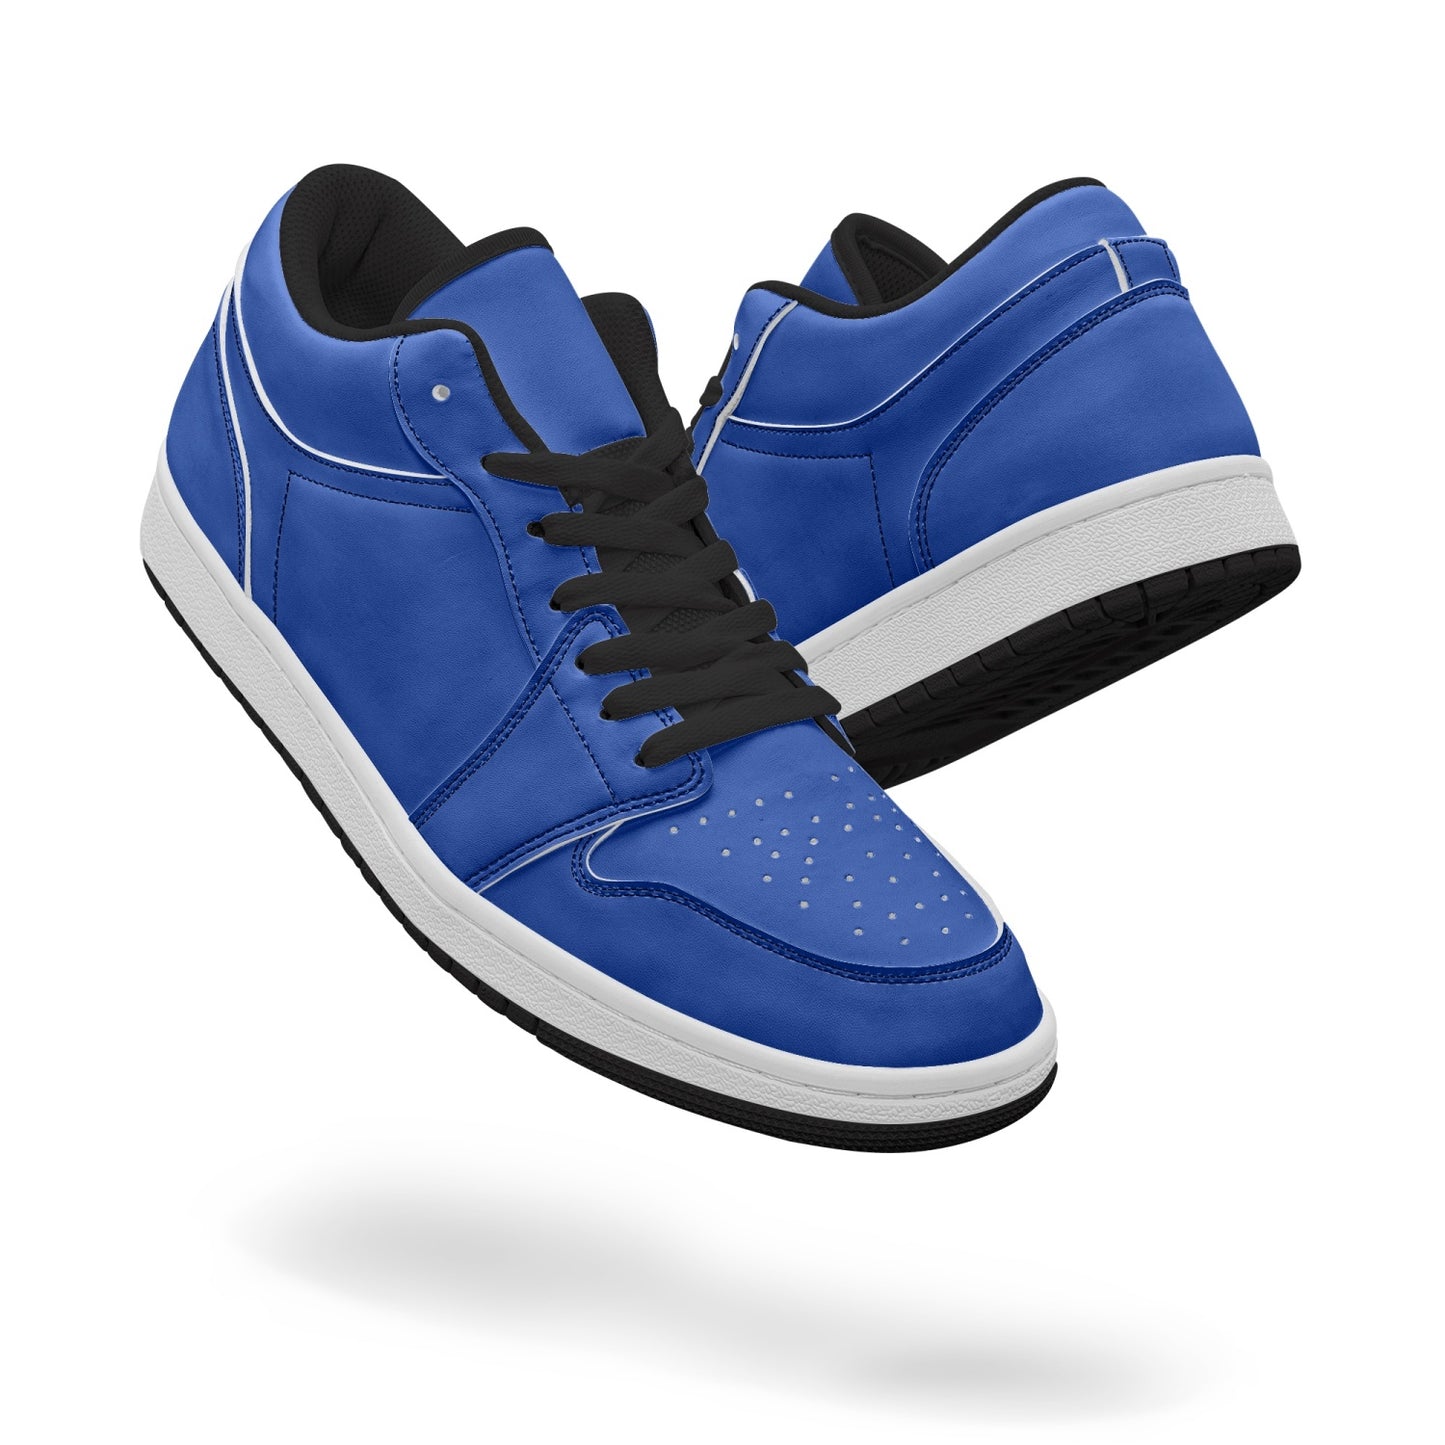 Israeli Blue Low-Top Leather Sneakers left and right